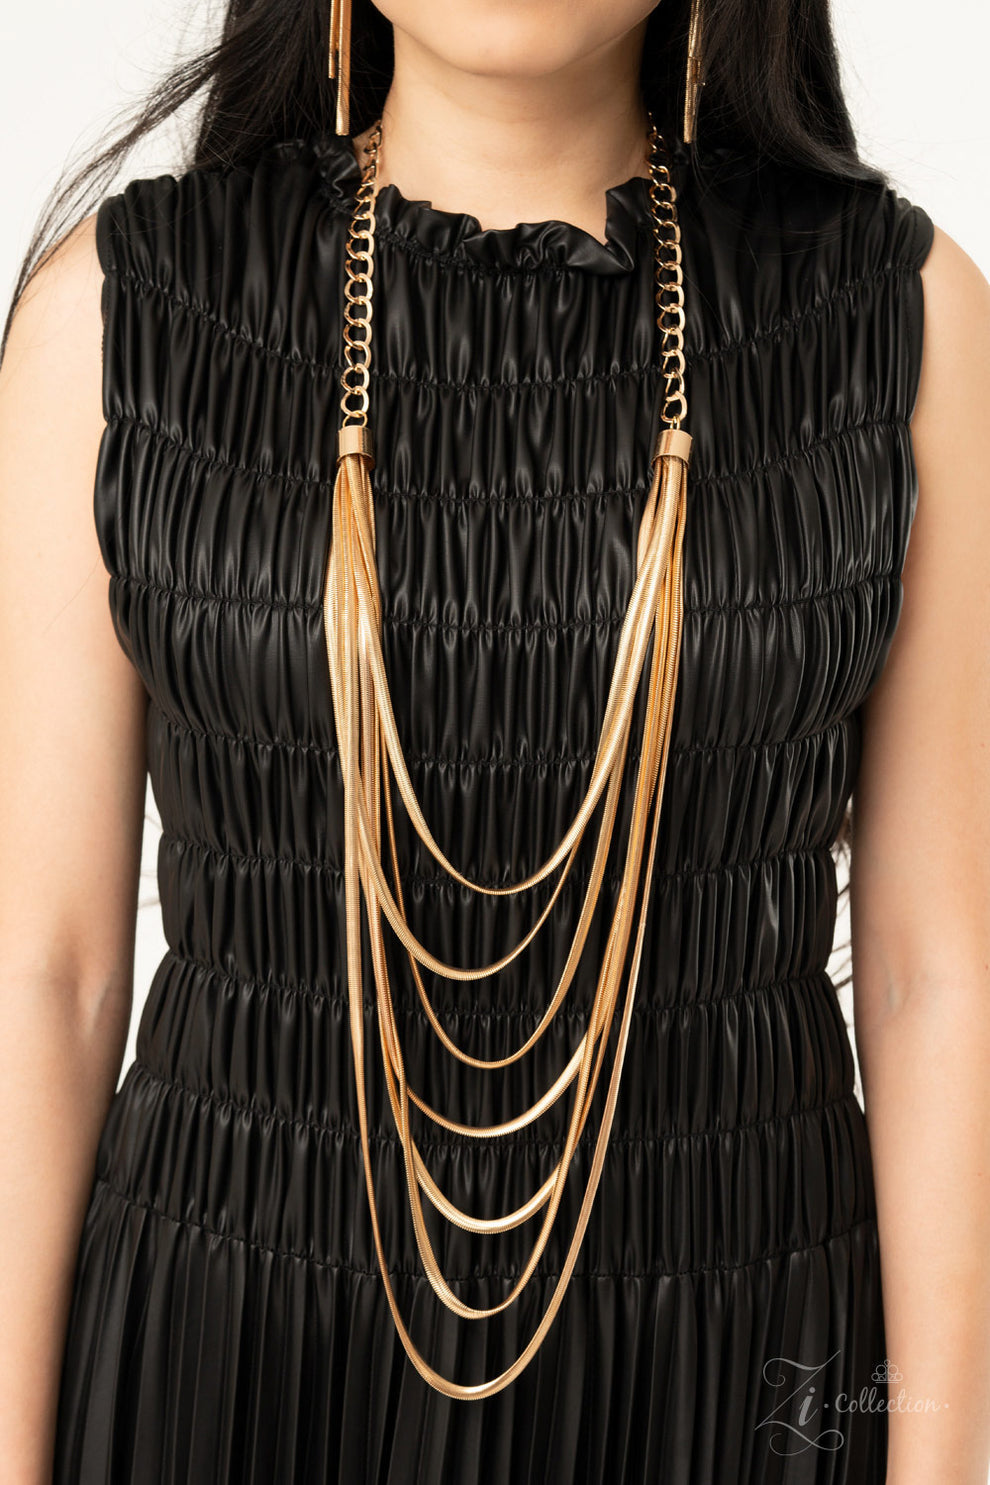 Commanding - 2020 Zi Collection Gold Necklace